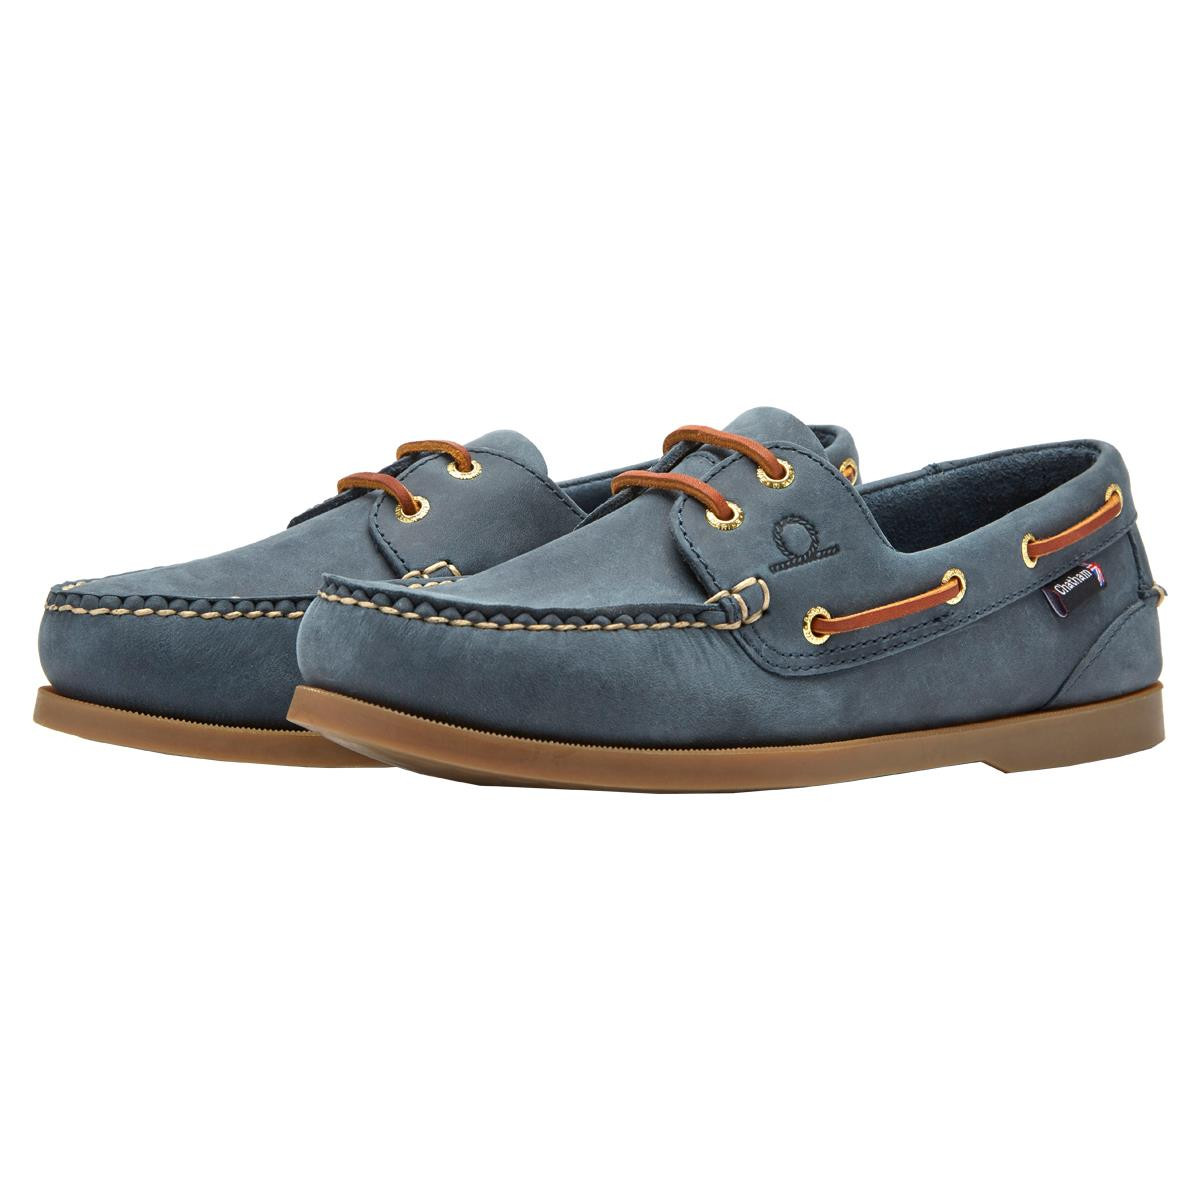 Image of Chatham Mens Deck II G2 Deck Shoes